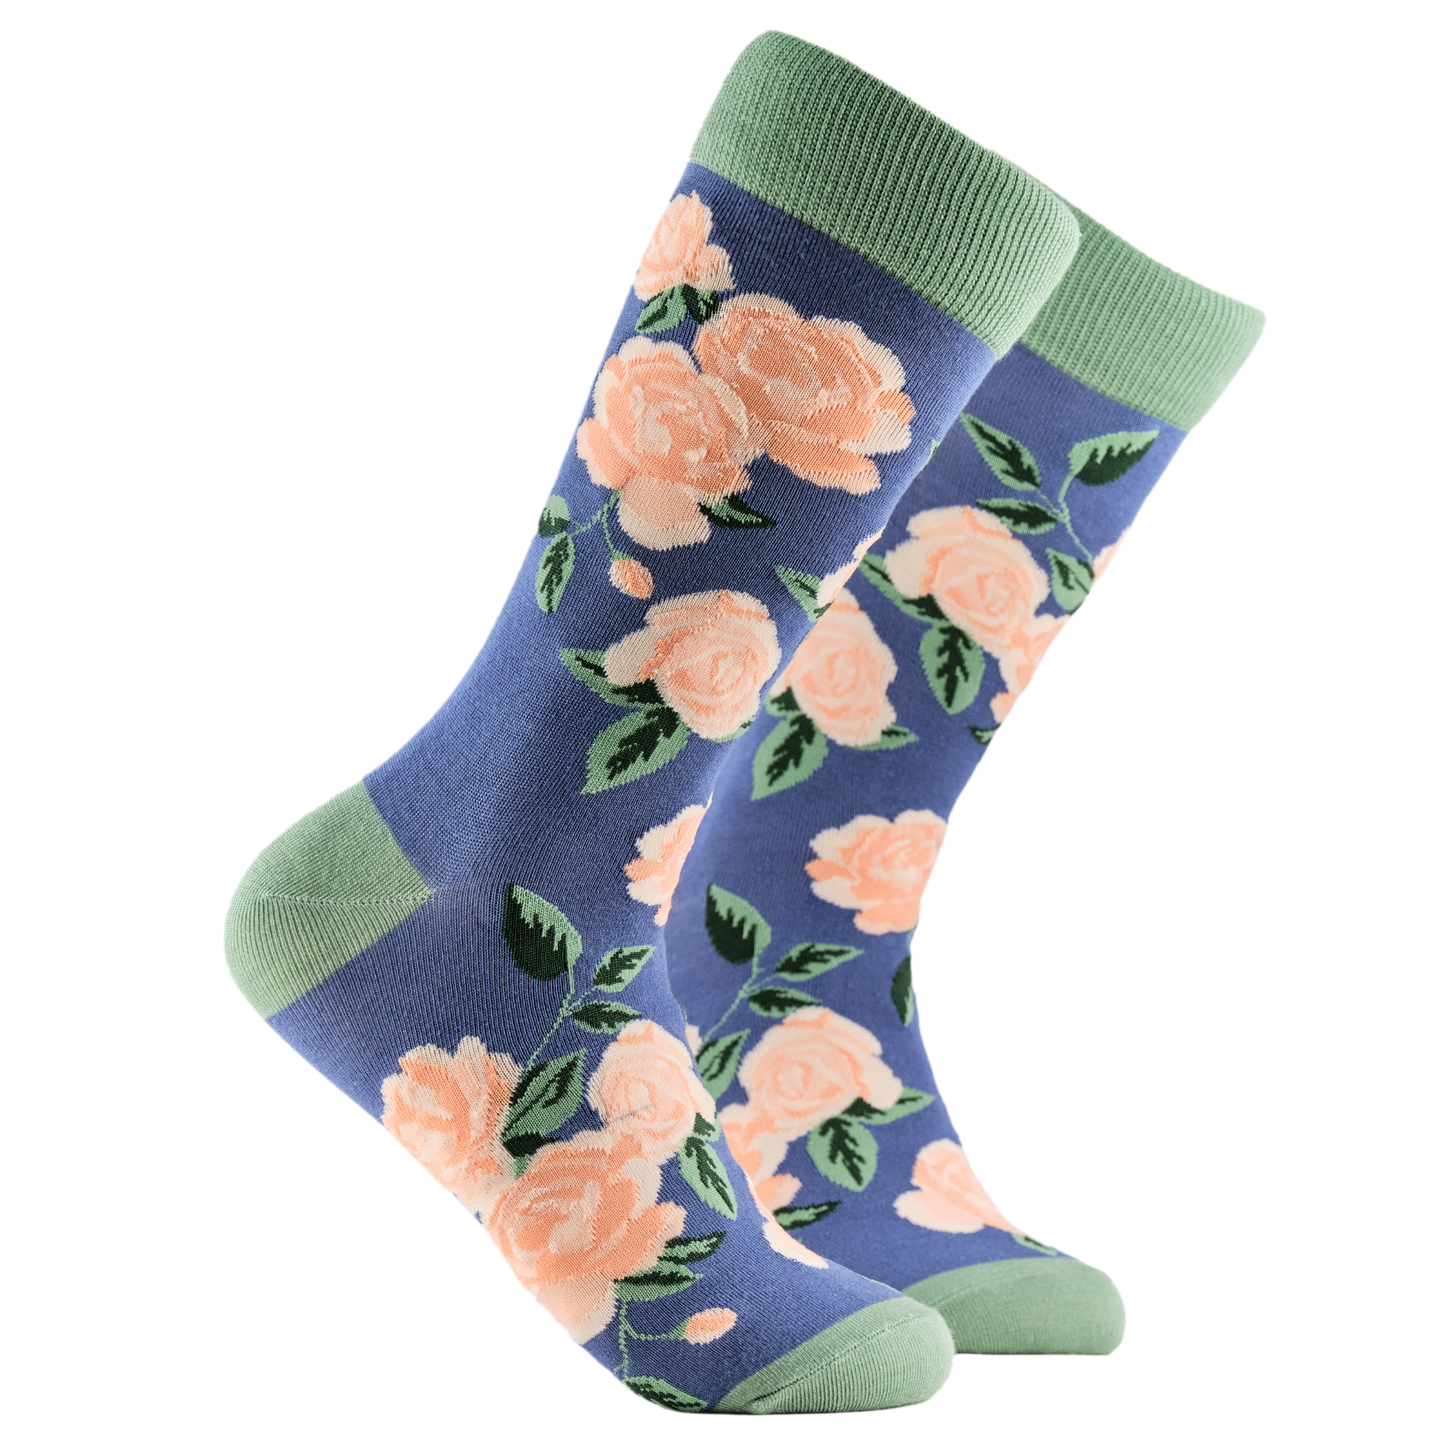 Rose Floral Bamboo Socks. A pair of socks depicting pink roses. Blue legs, green cuff, heel and toe.